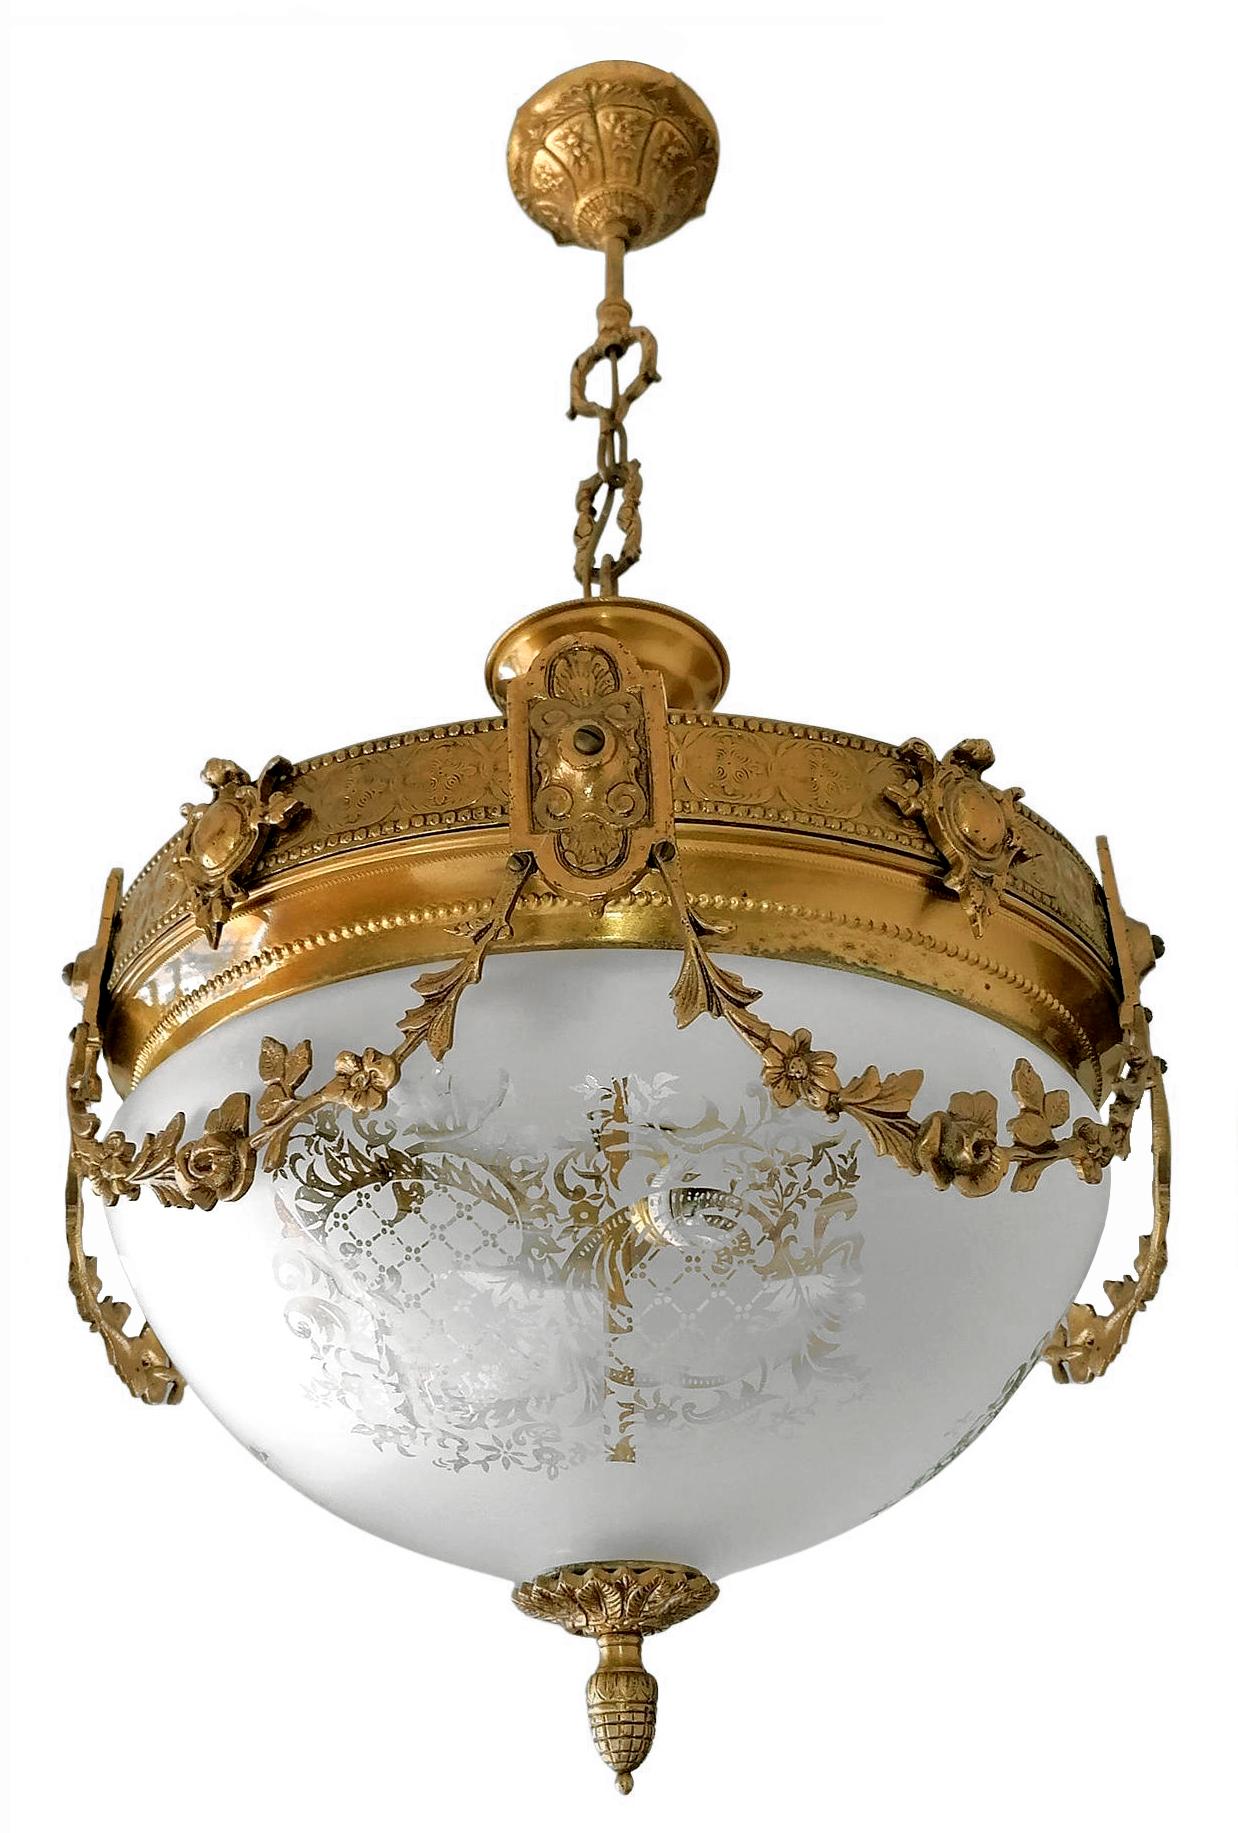 A wonderful gilt bronze and etched-glass two-light ceiling fixture decorated with Fine ornaments and garlands, France, early 20th century.
In very good condition - original etched-glass shades without damages, bronze with beautiful patina.
Two